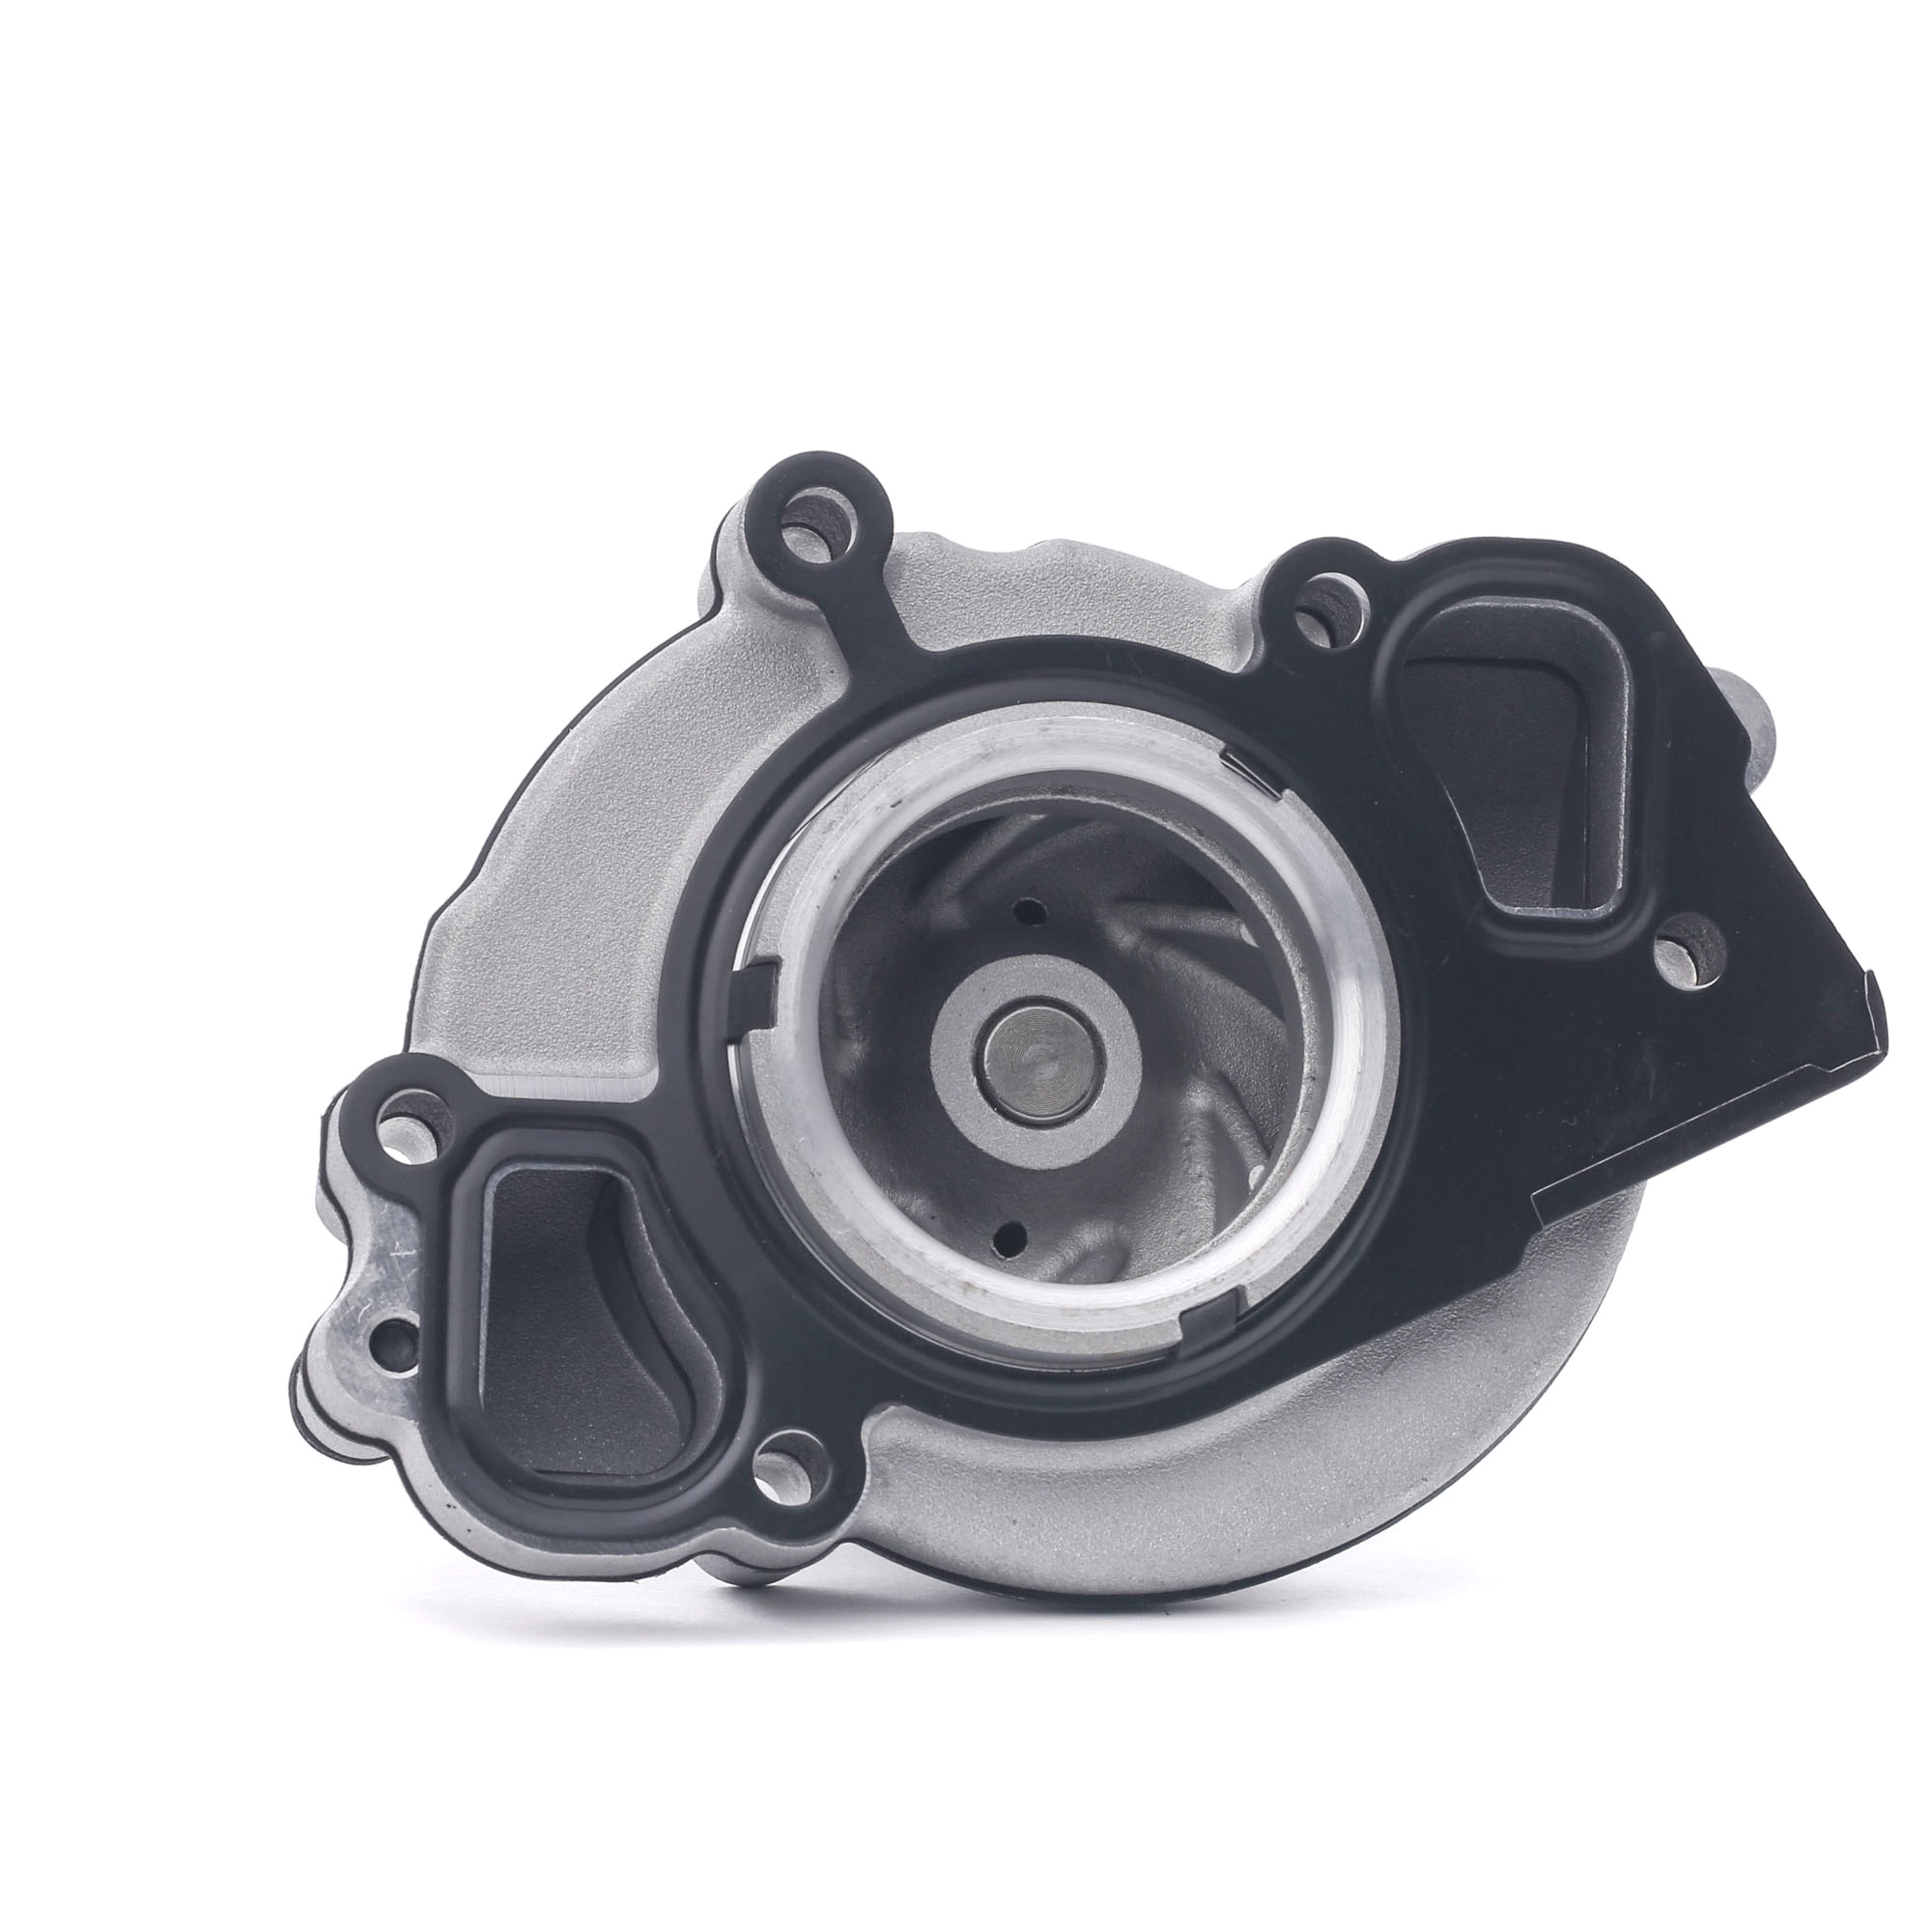 STARK SKWP-0520302 Water pump without belt pulley, with gaskets/seals, with lid